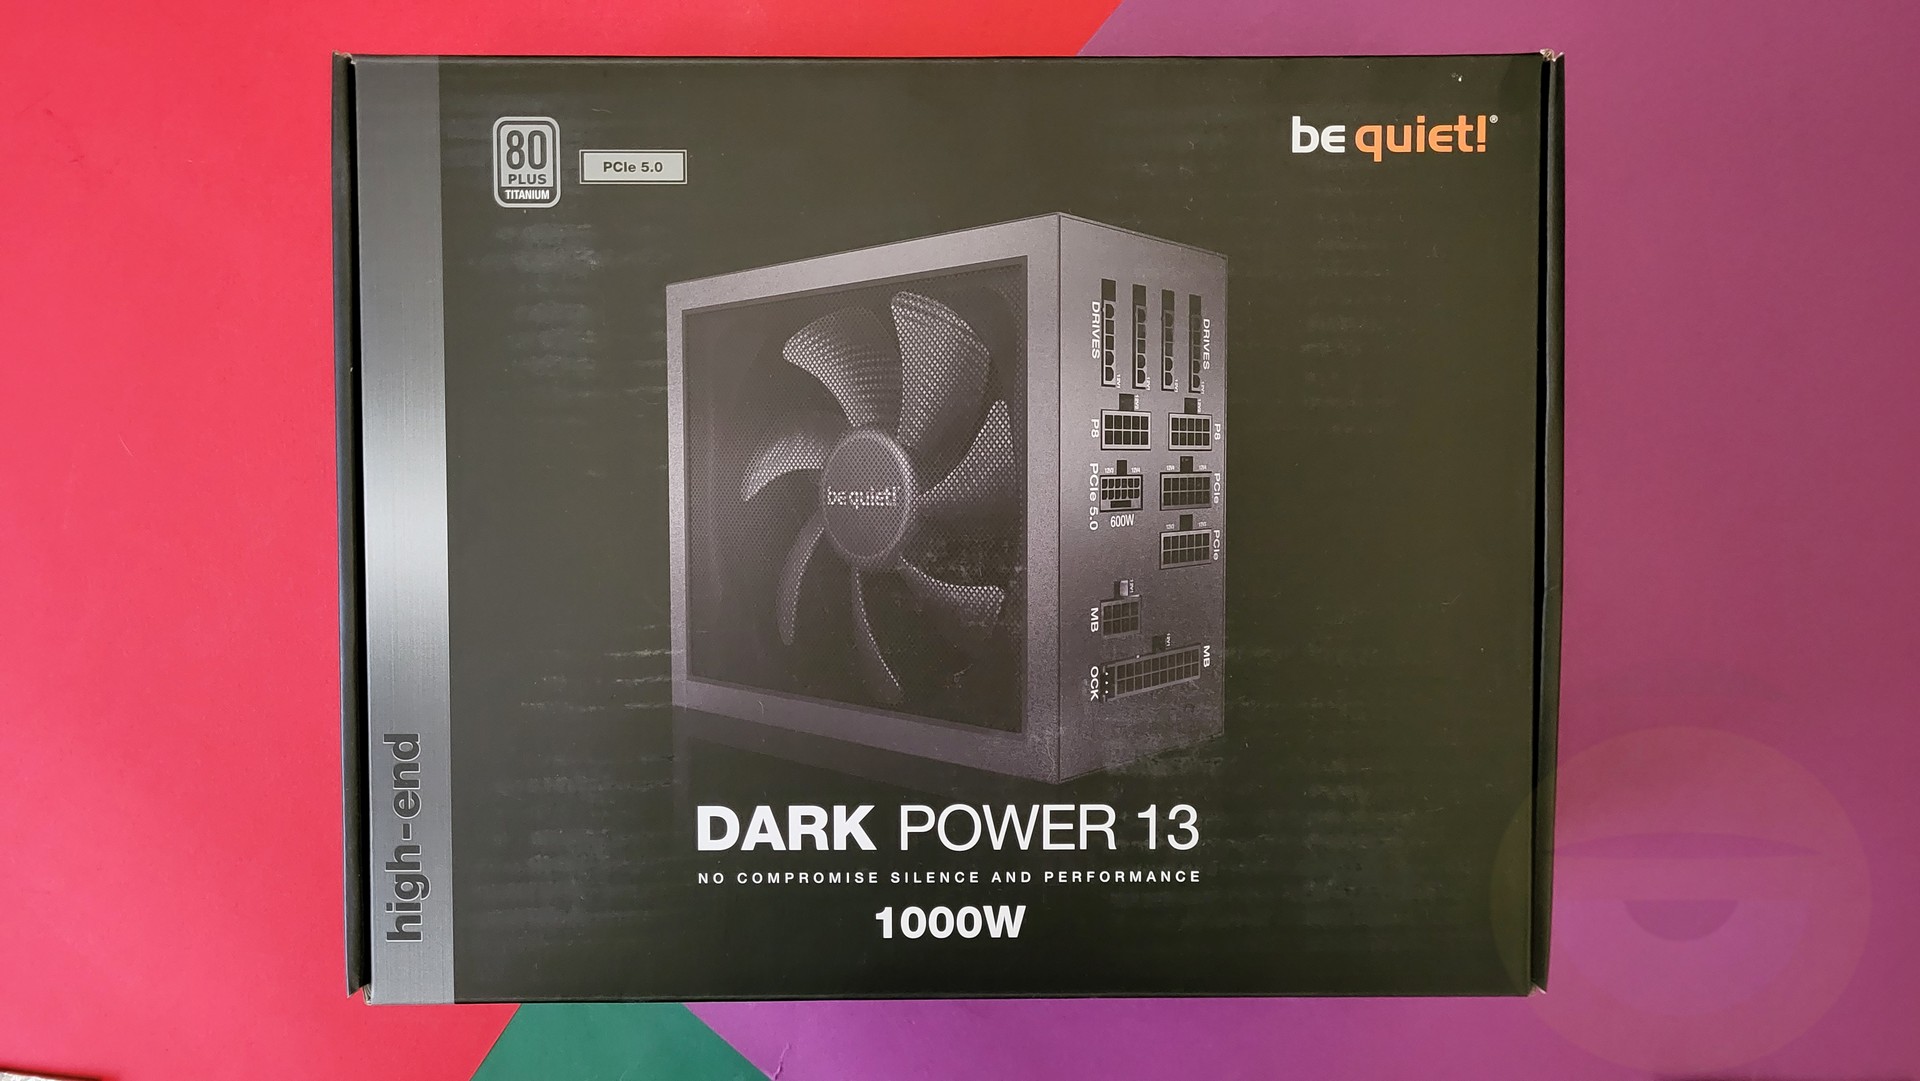 be quiet! Dark Power 13 1000W Review - Master of Power